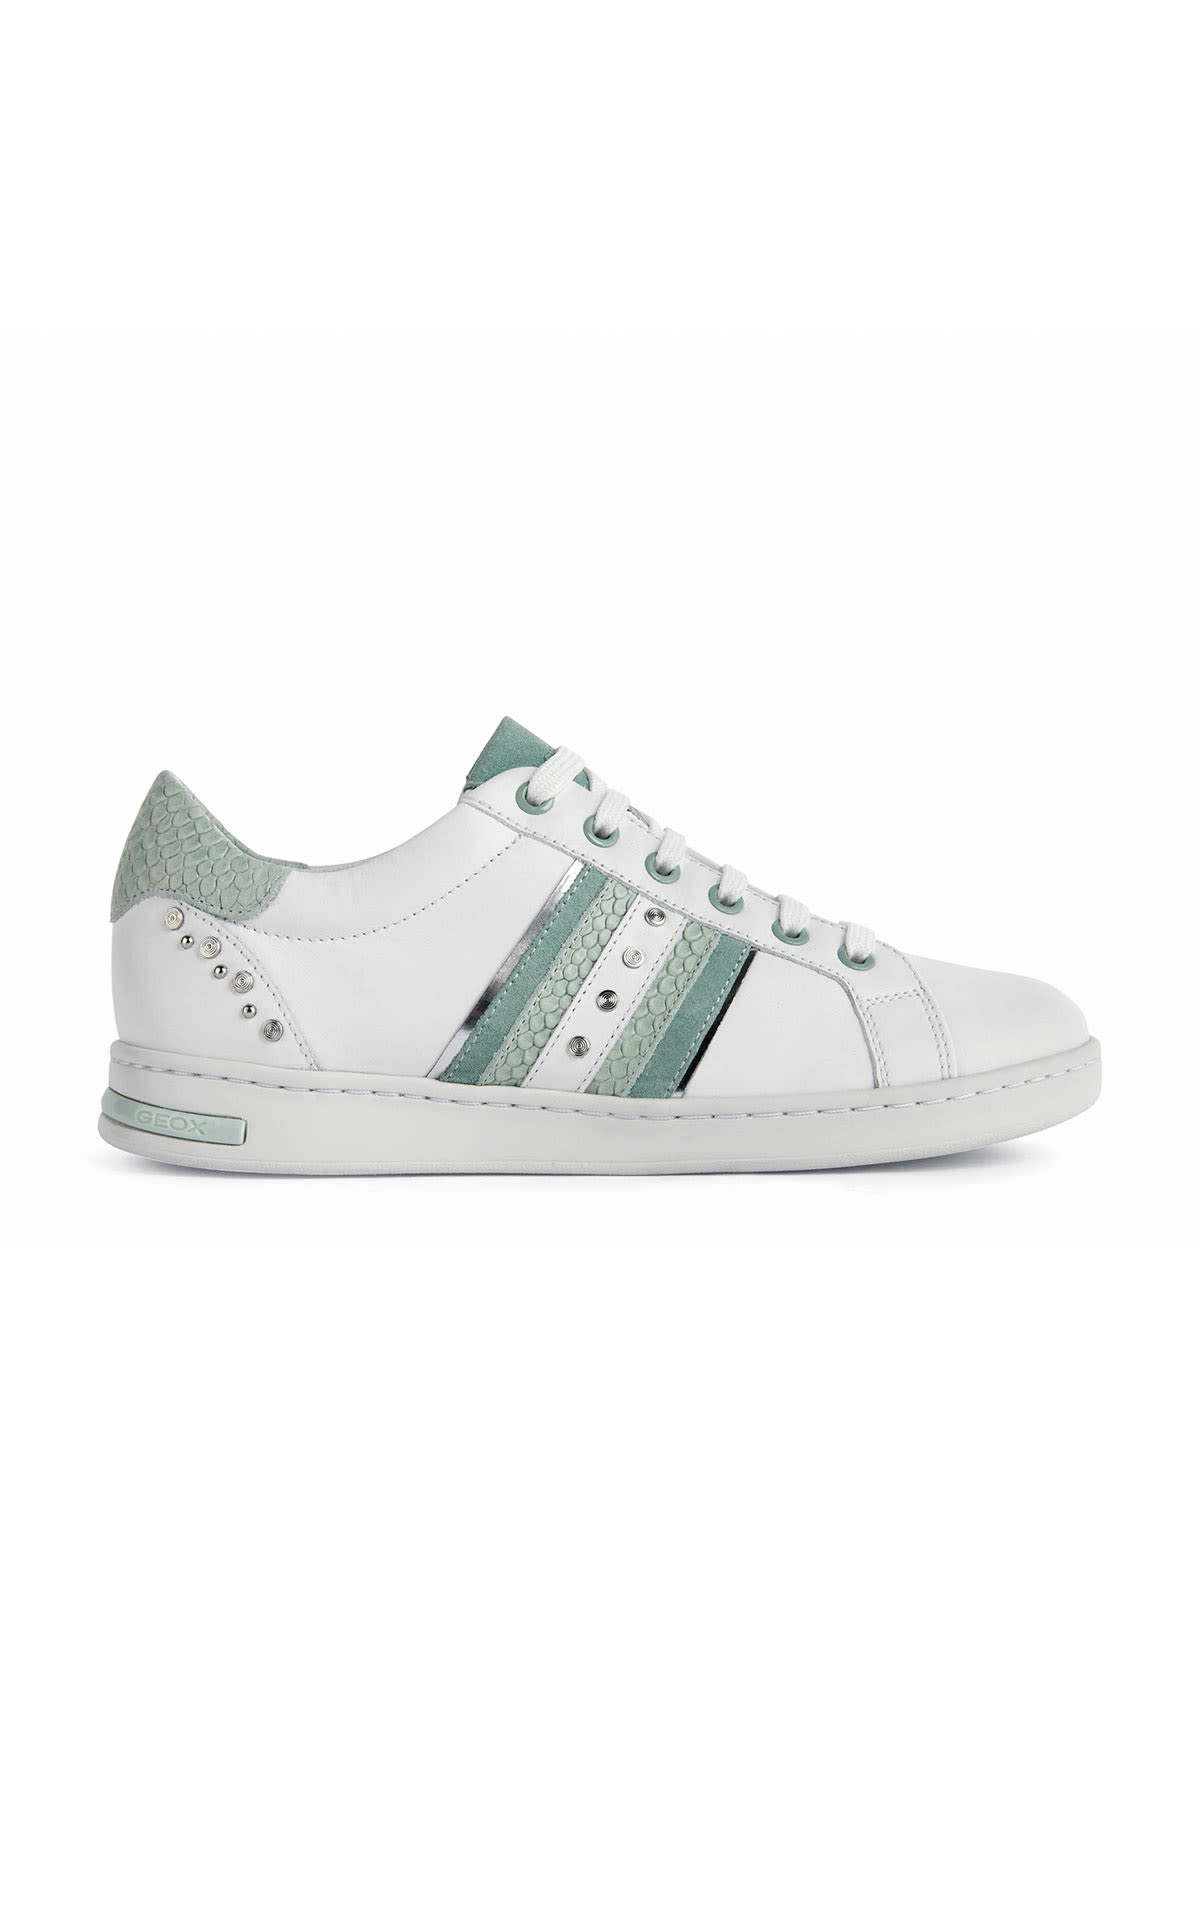 White sneaker with green details Geox